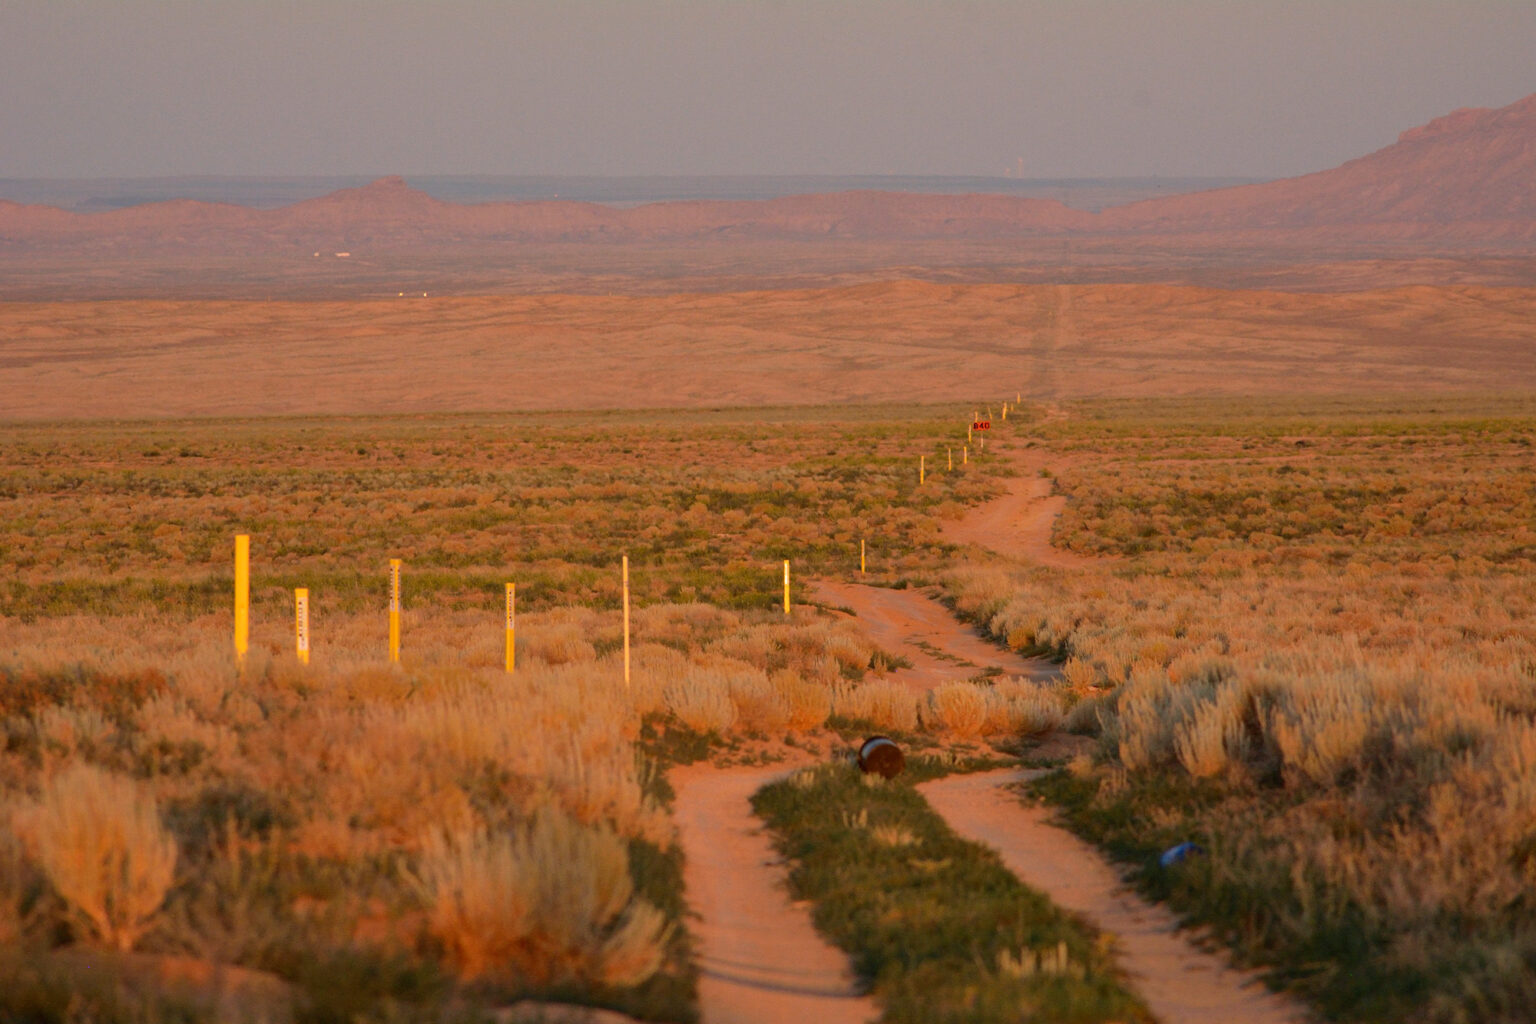 Dusk falls on the existing Southern Trails natural gas pipeline owned by the Navajo Nation as it passes through empty land west of Shiprock, New Mexico. Locals say someone showed up and put in the yellow markers a few months earlier.